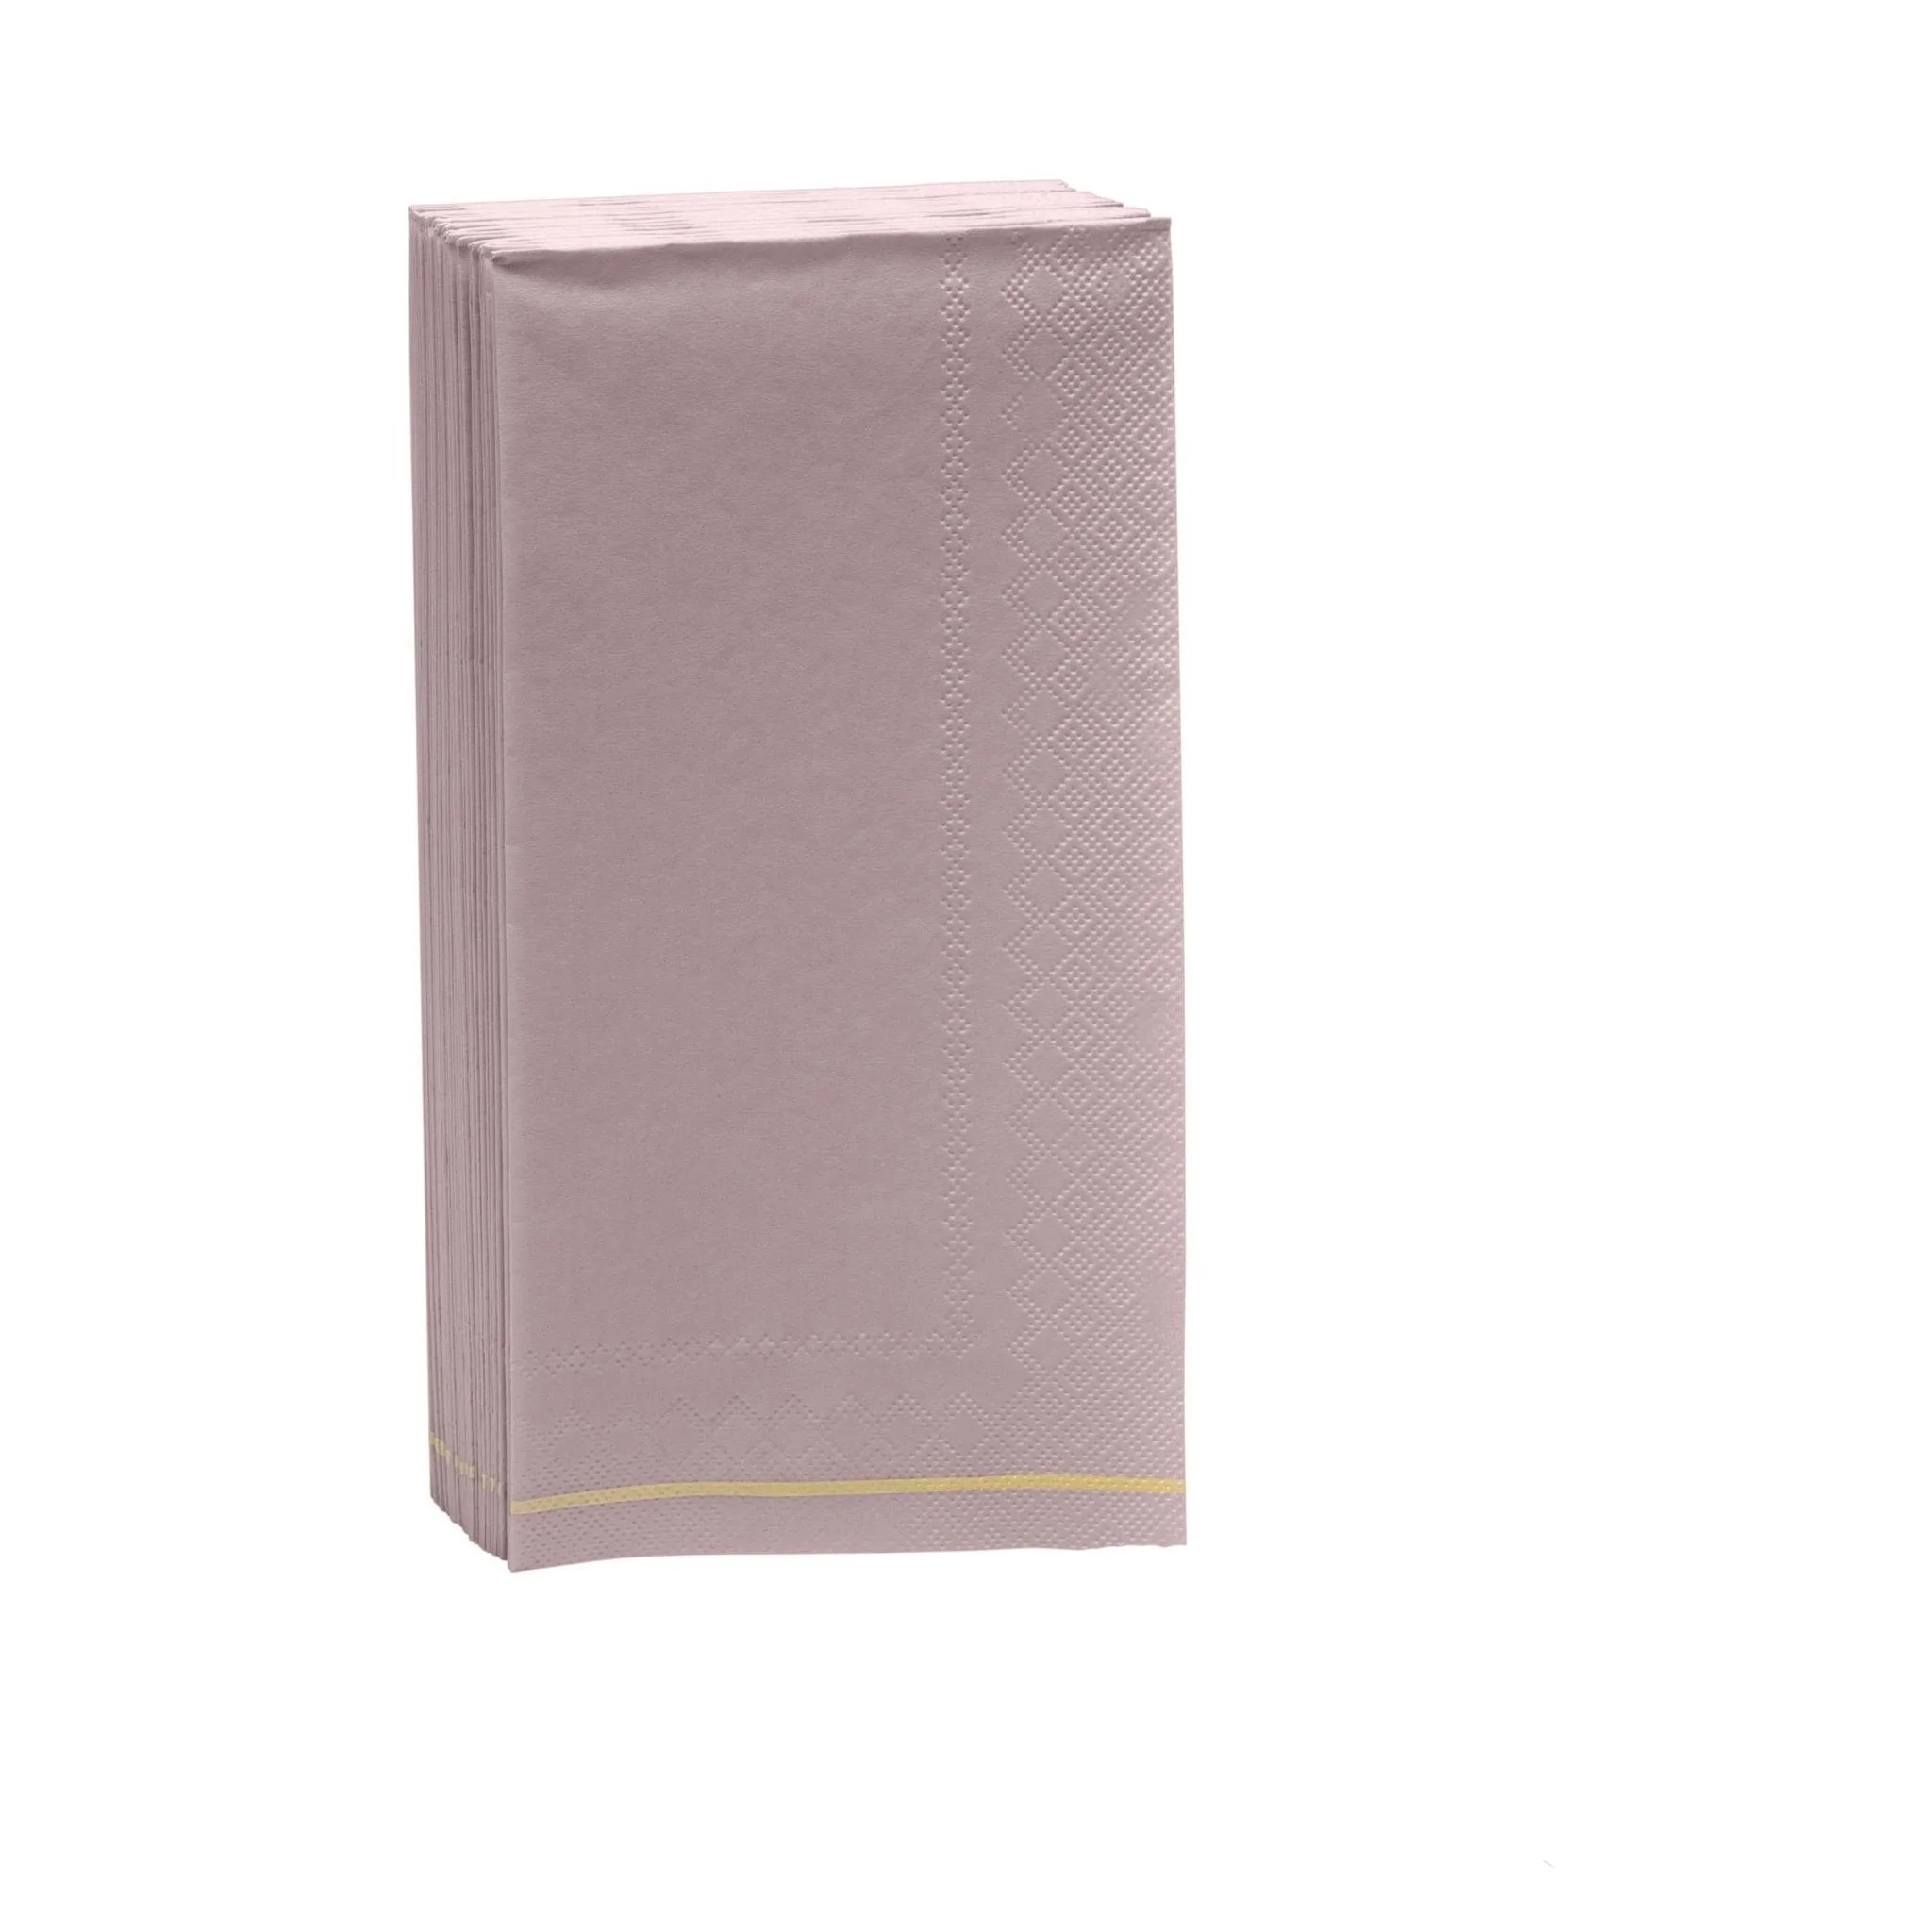 Luxe Party Mauve with Gold Stripe Dinner Napkins - 16 pcs